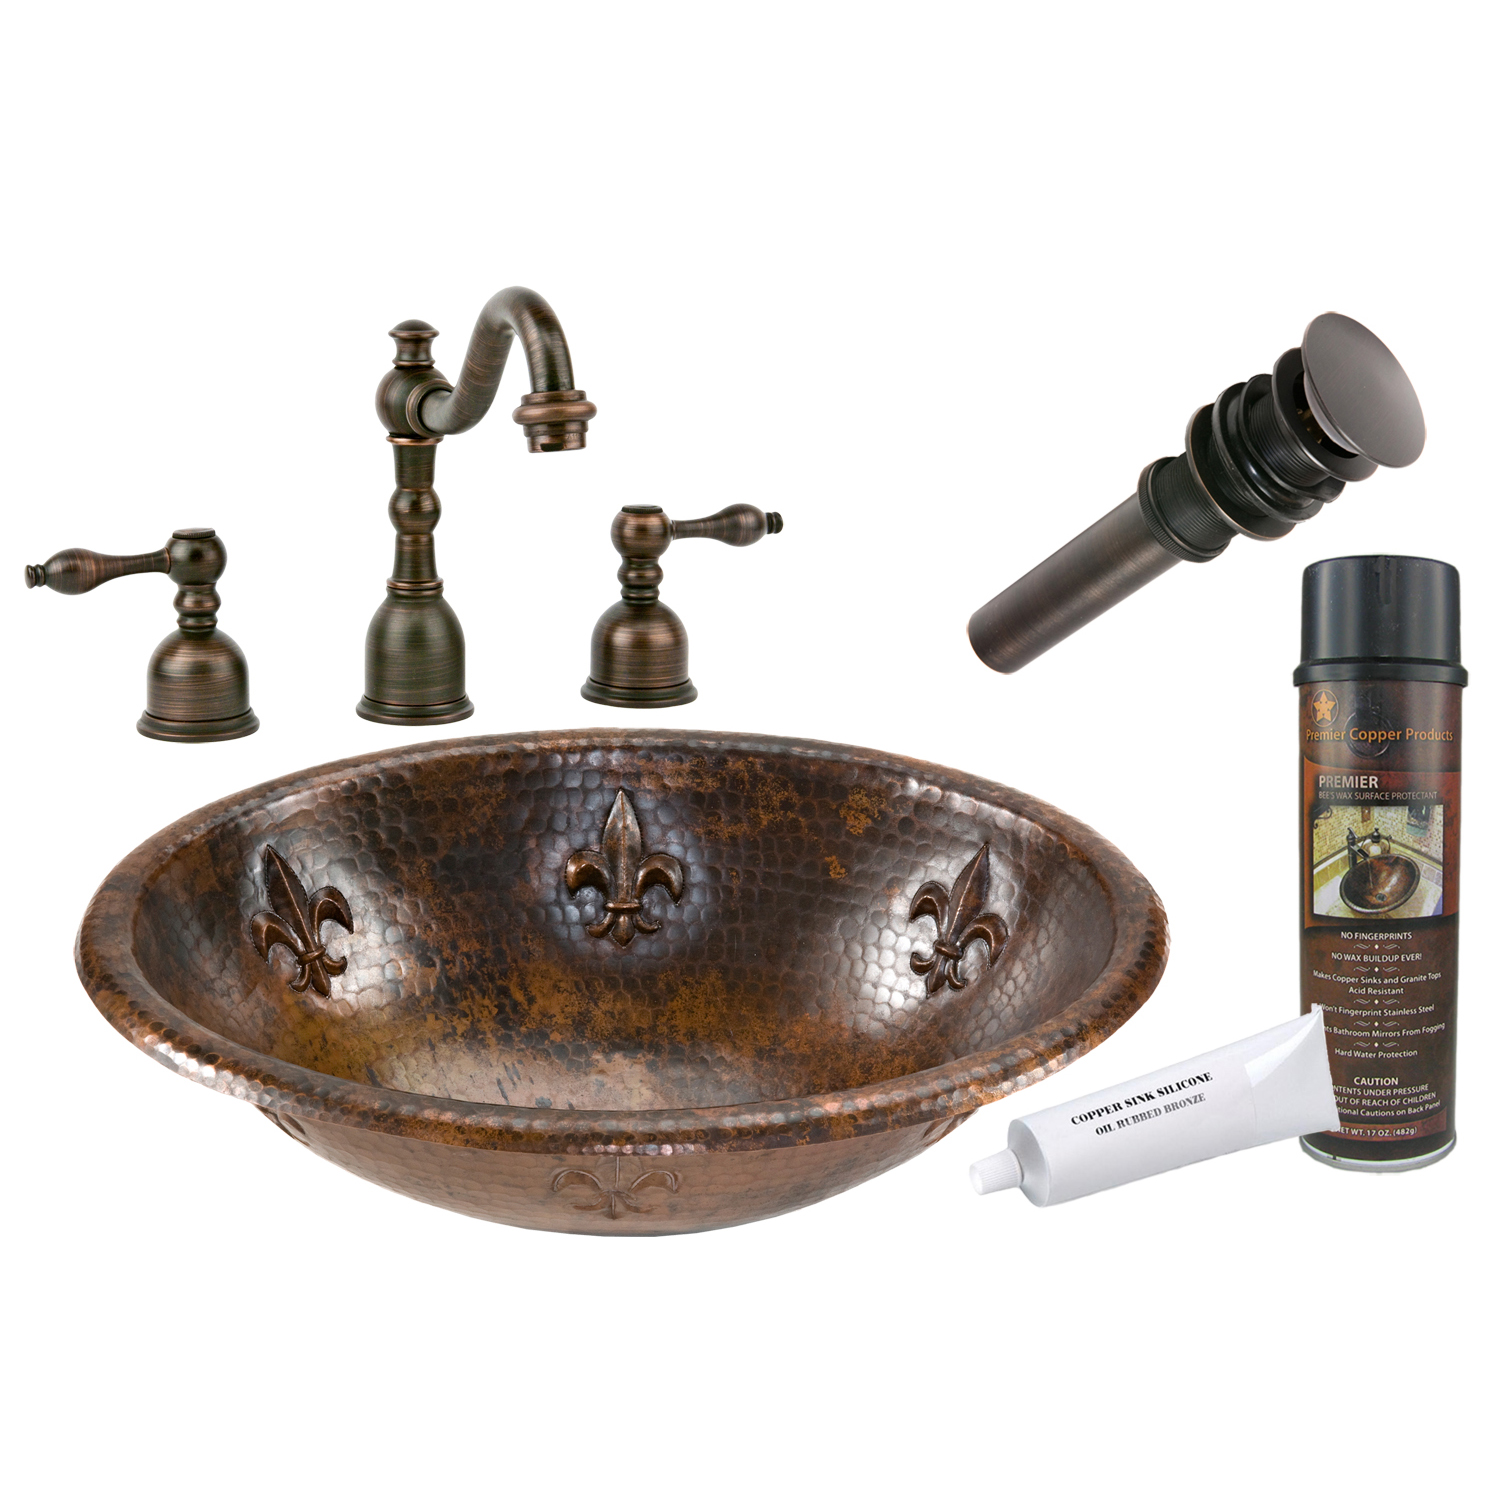 Oval Fleur De Lis Self Rimming Hammered Copper Sink, Faucet And Accessories Package, Oil Rubbed Bronze